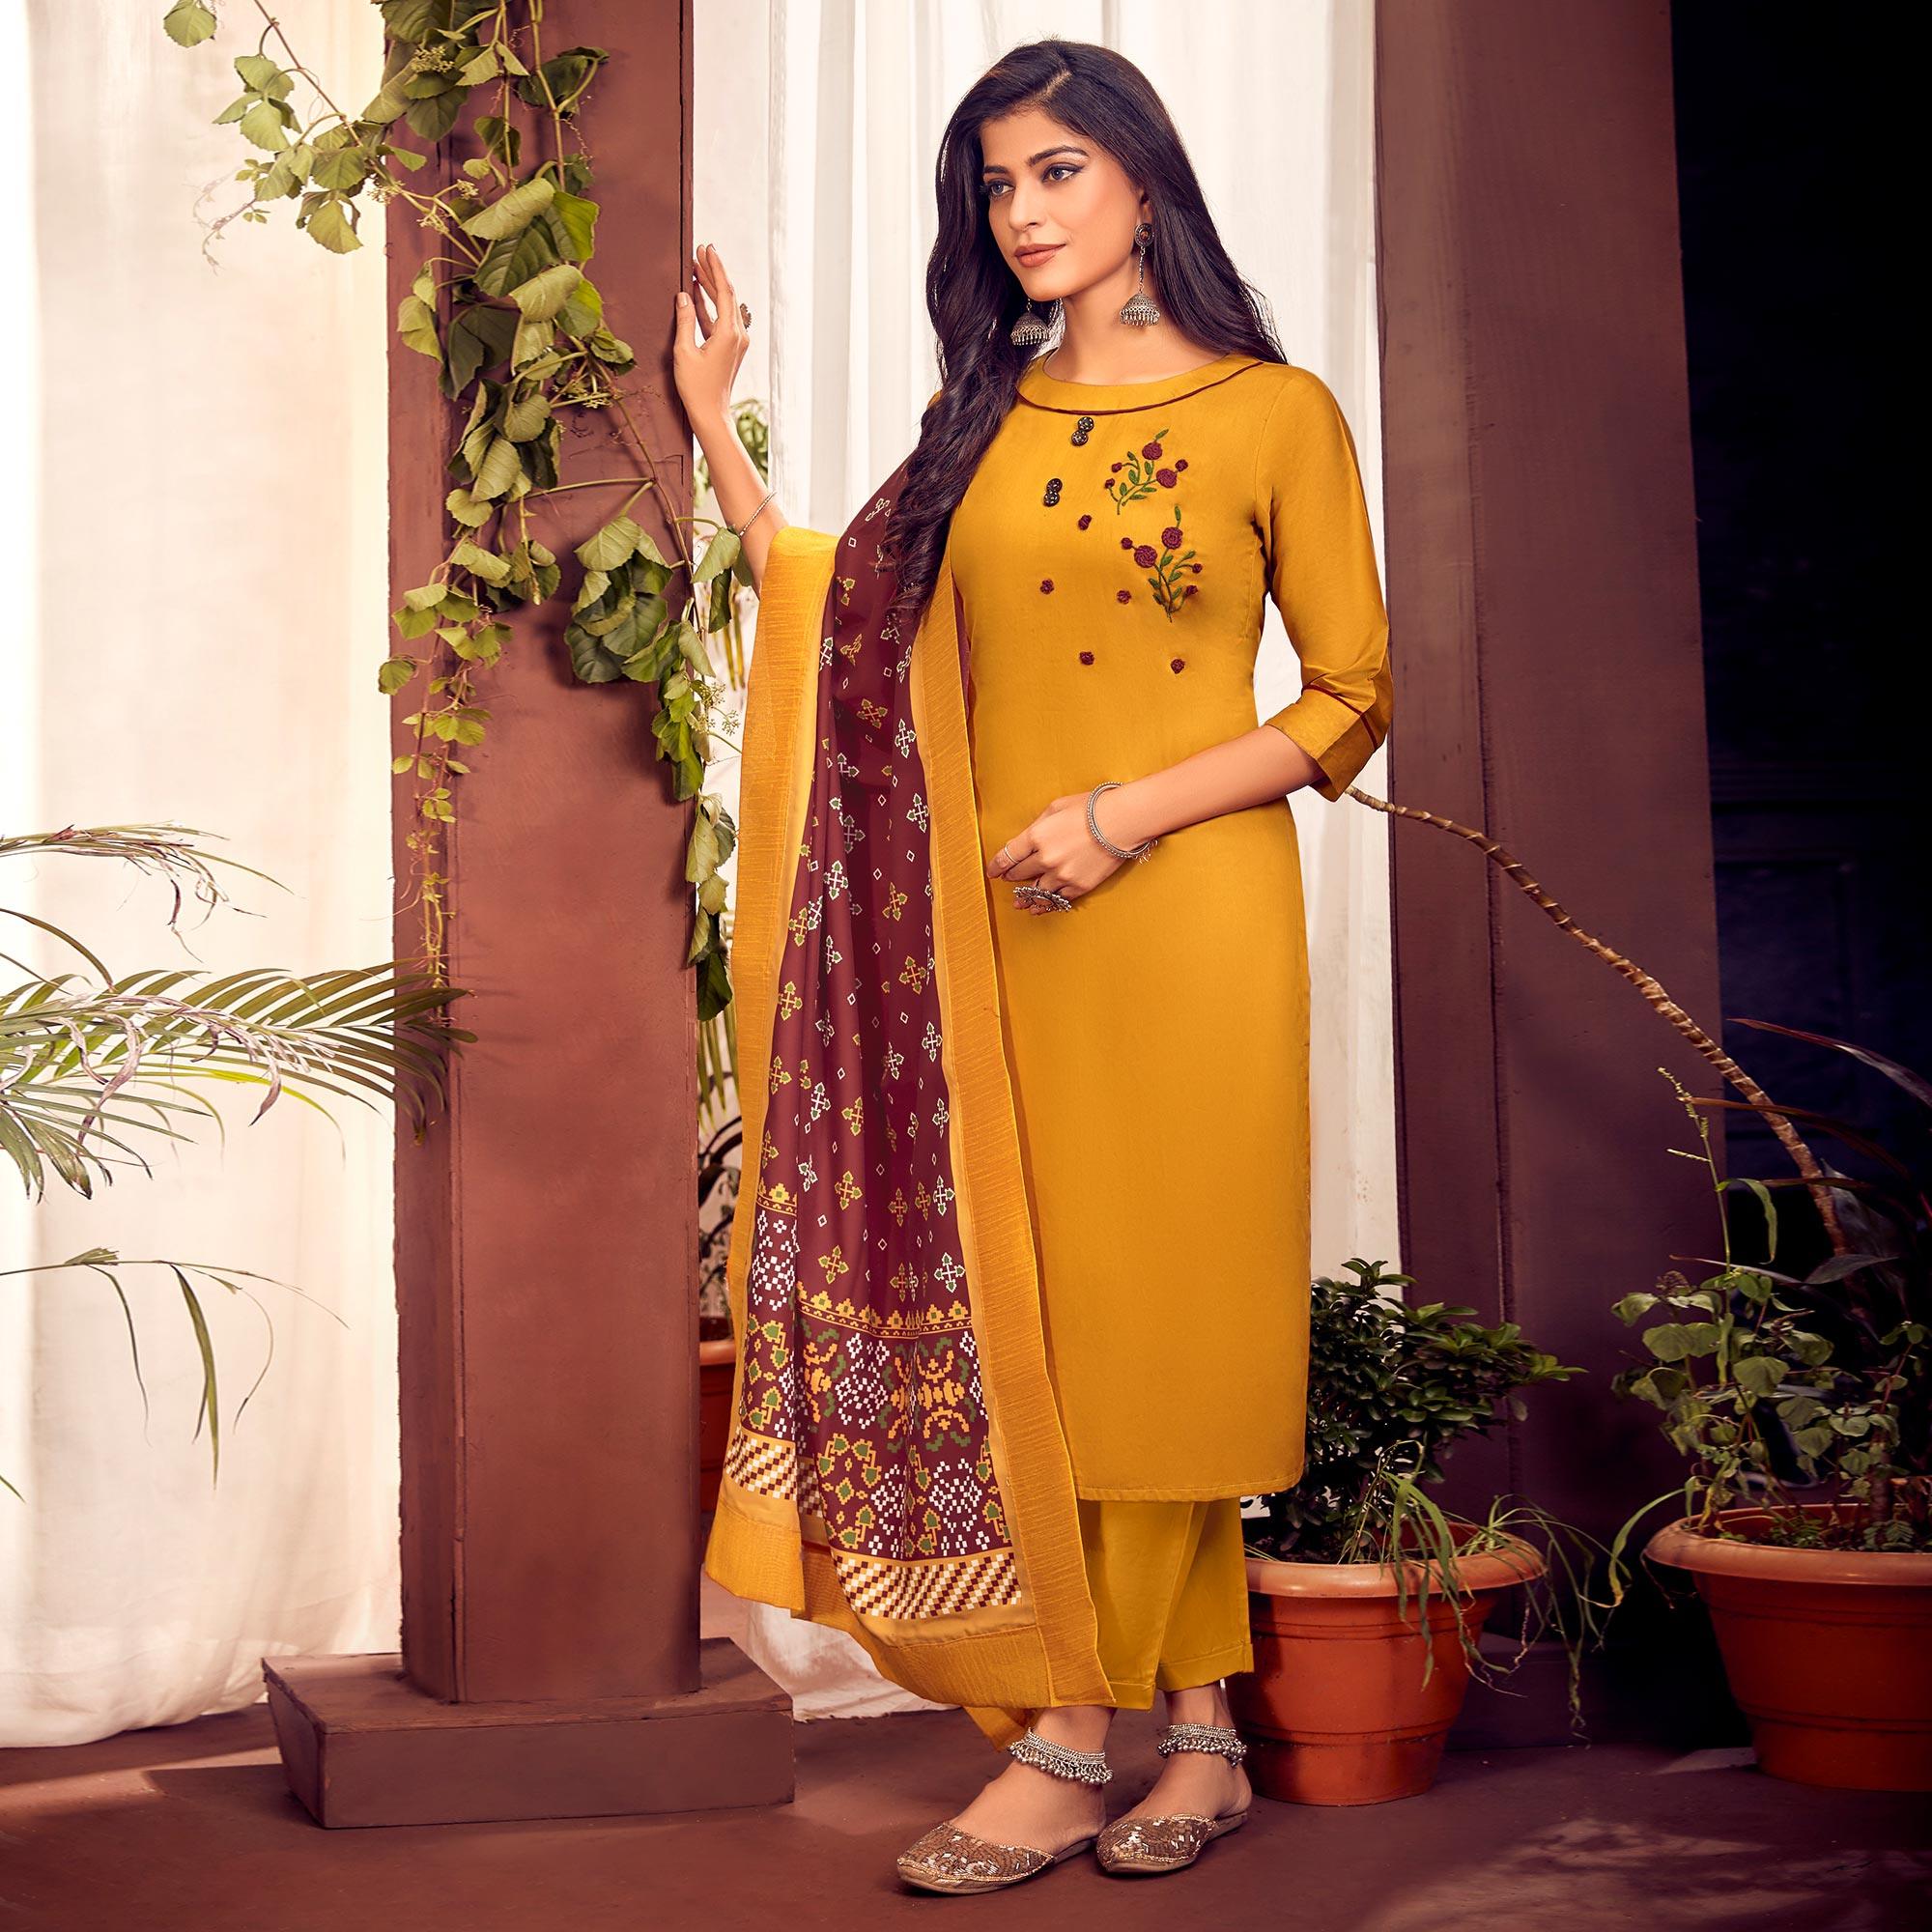 Women Rayon Lucknowi Chikankari Embroidered Short Kurti Mustard Yellow S in  Lucknow at best price by Adab Chikan Handicraft - Justdial